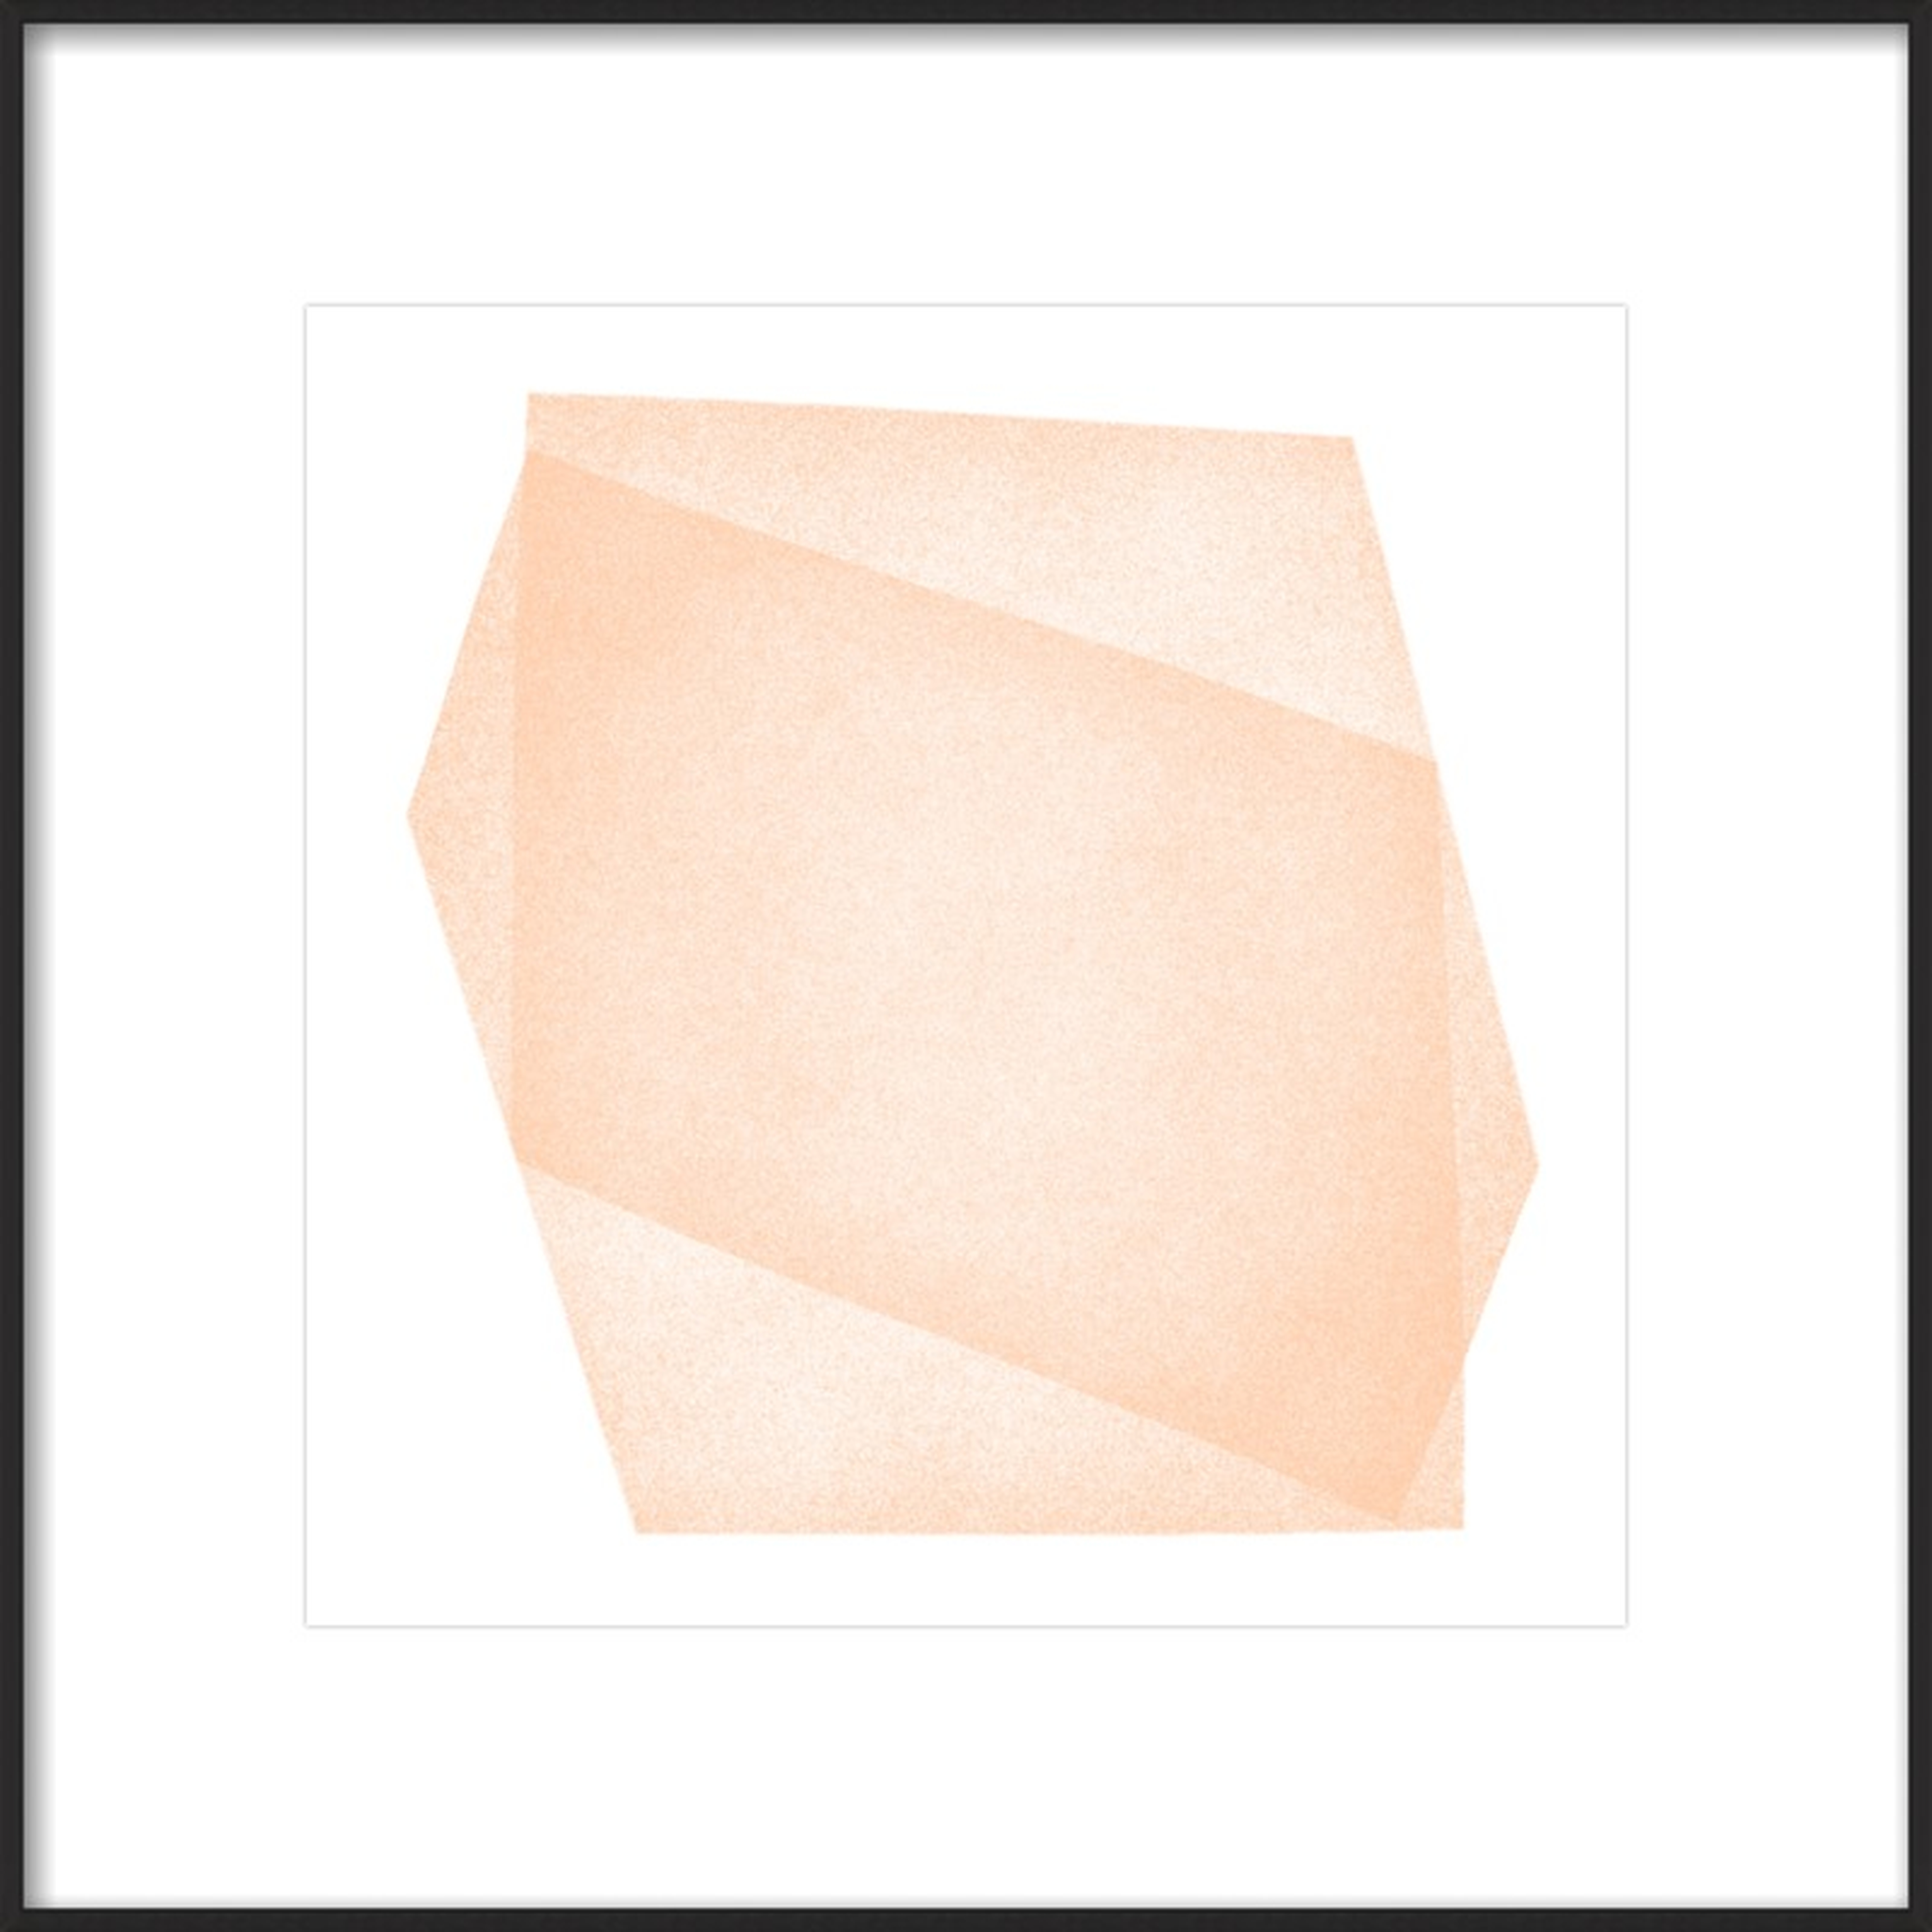 Pale Peach Structure: Soft Geometry, 20" x 20" - Artfully Walls